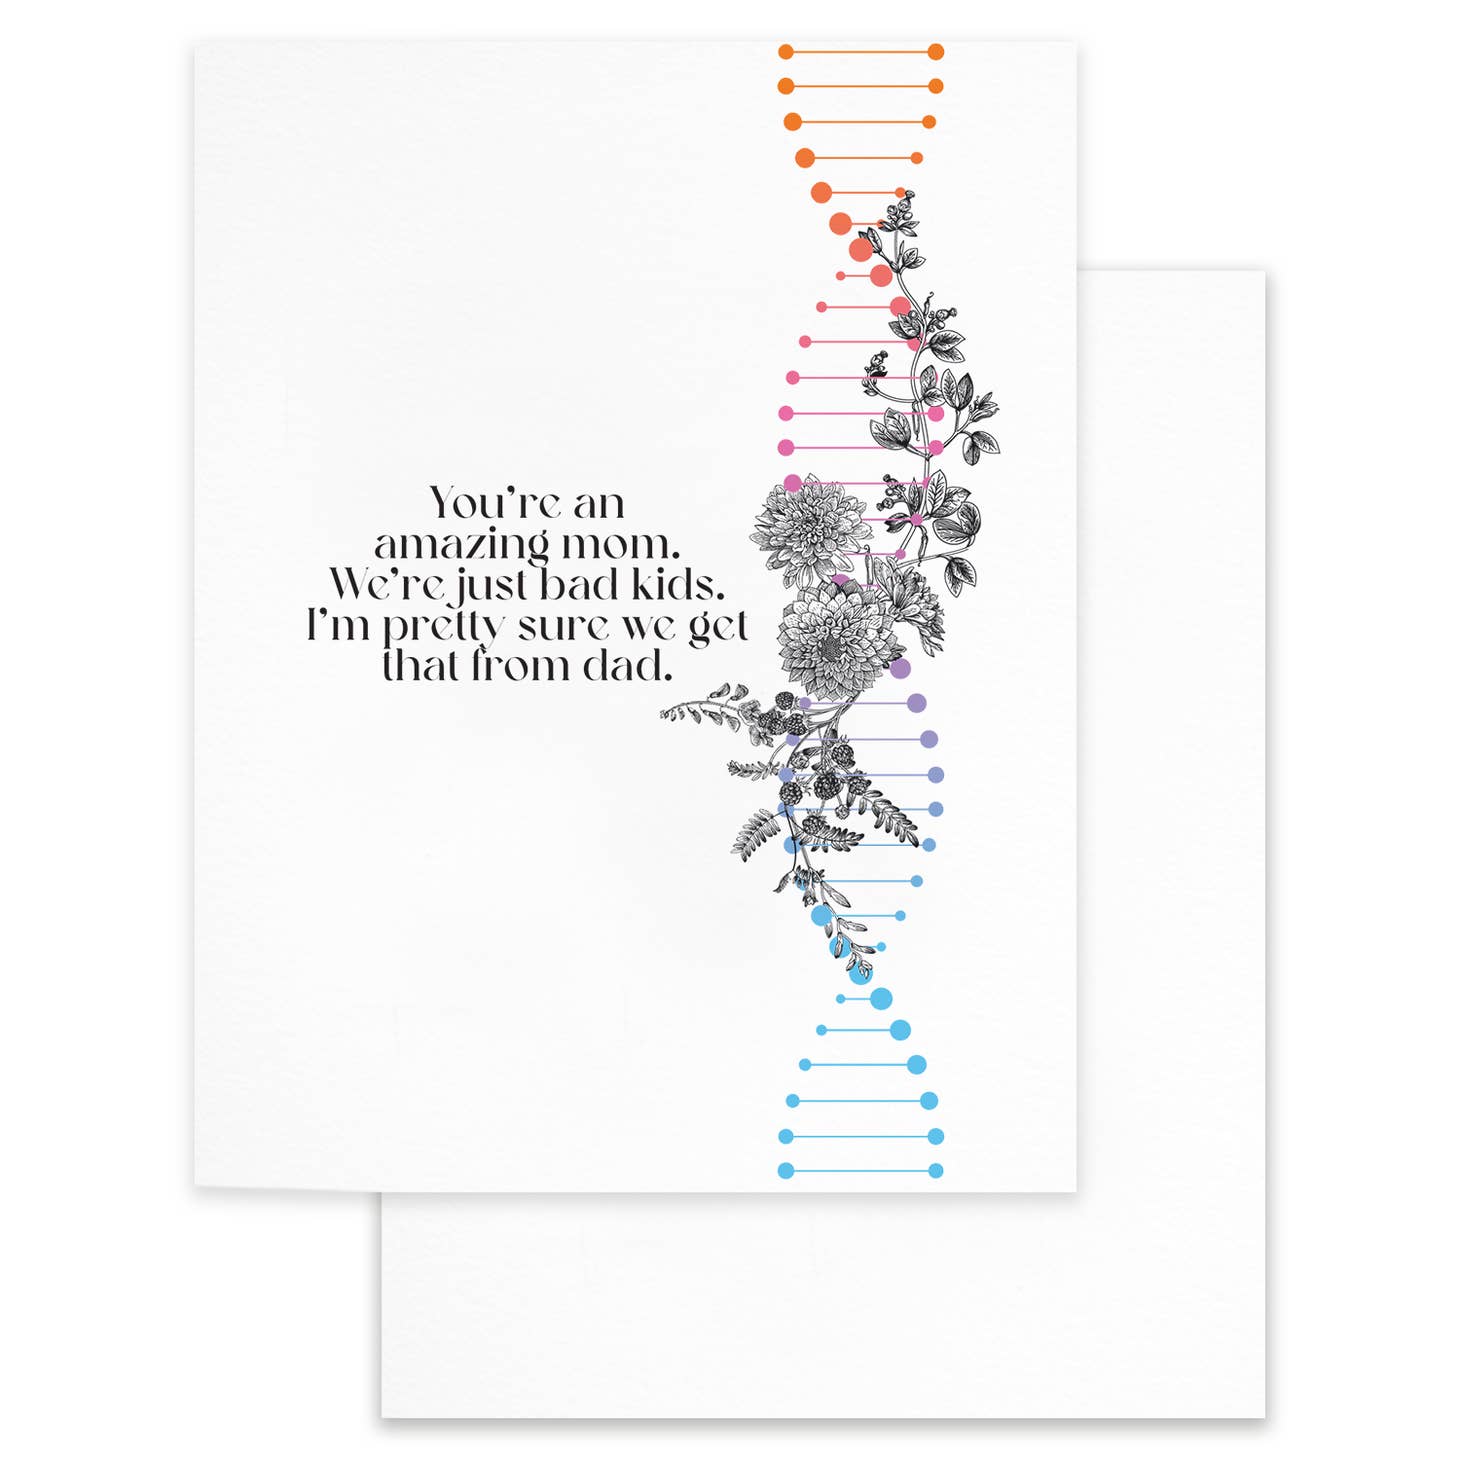 Cardideology "You're an amazing mom" card